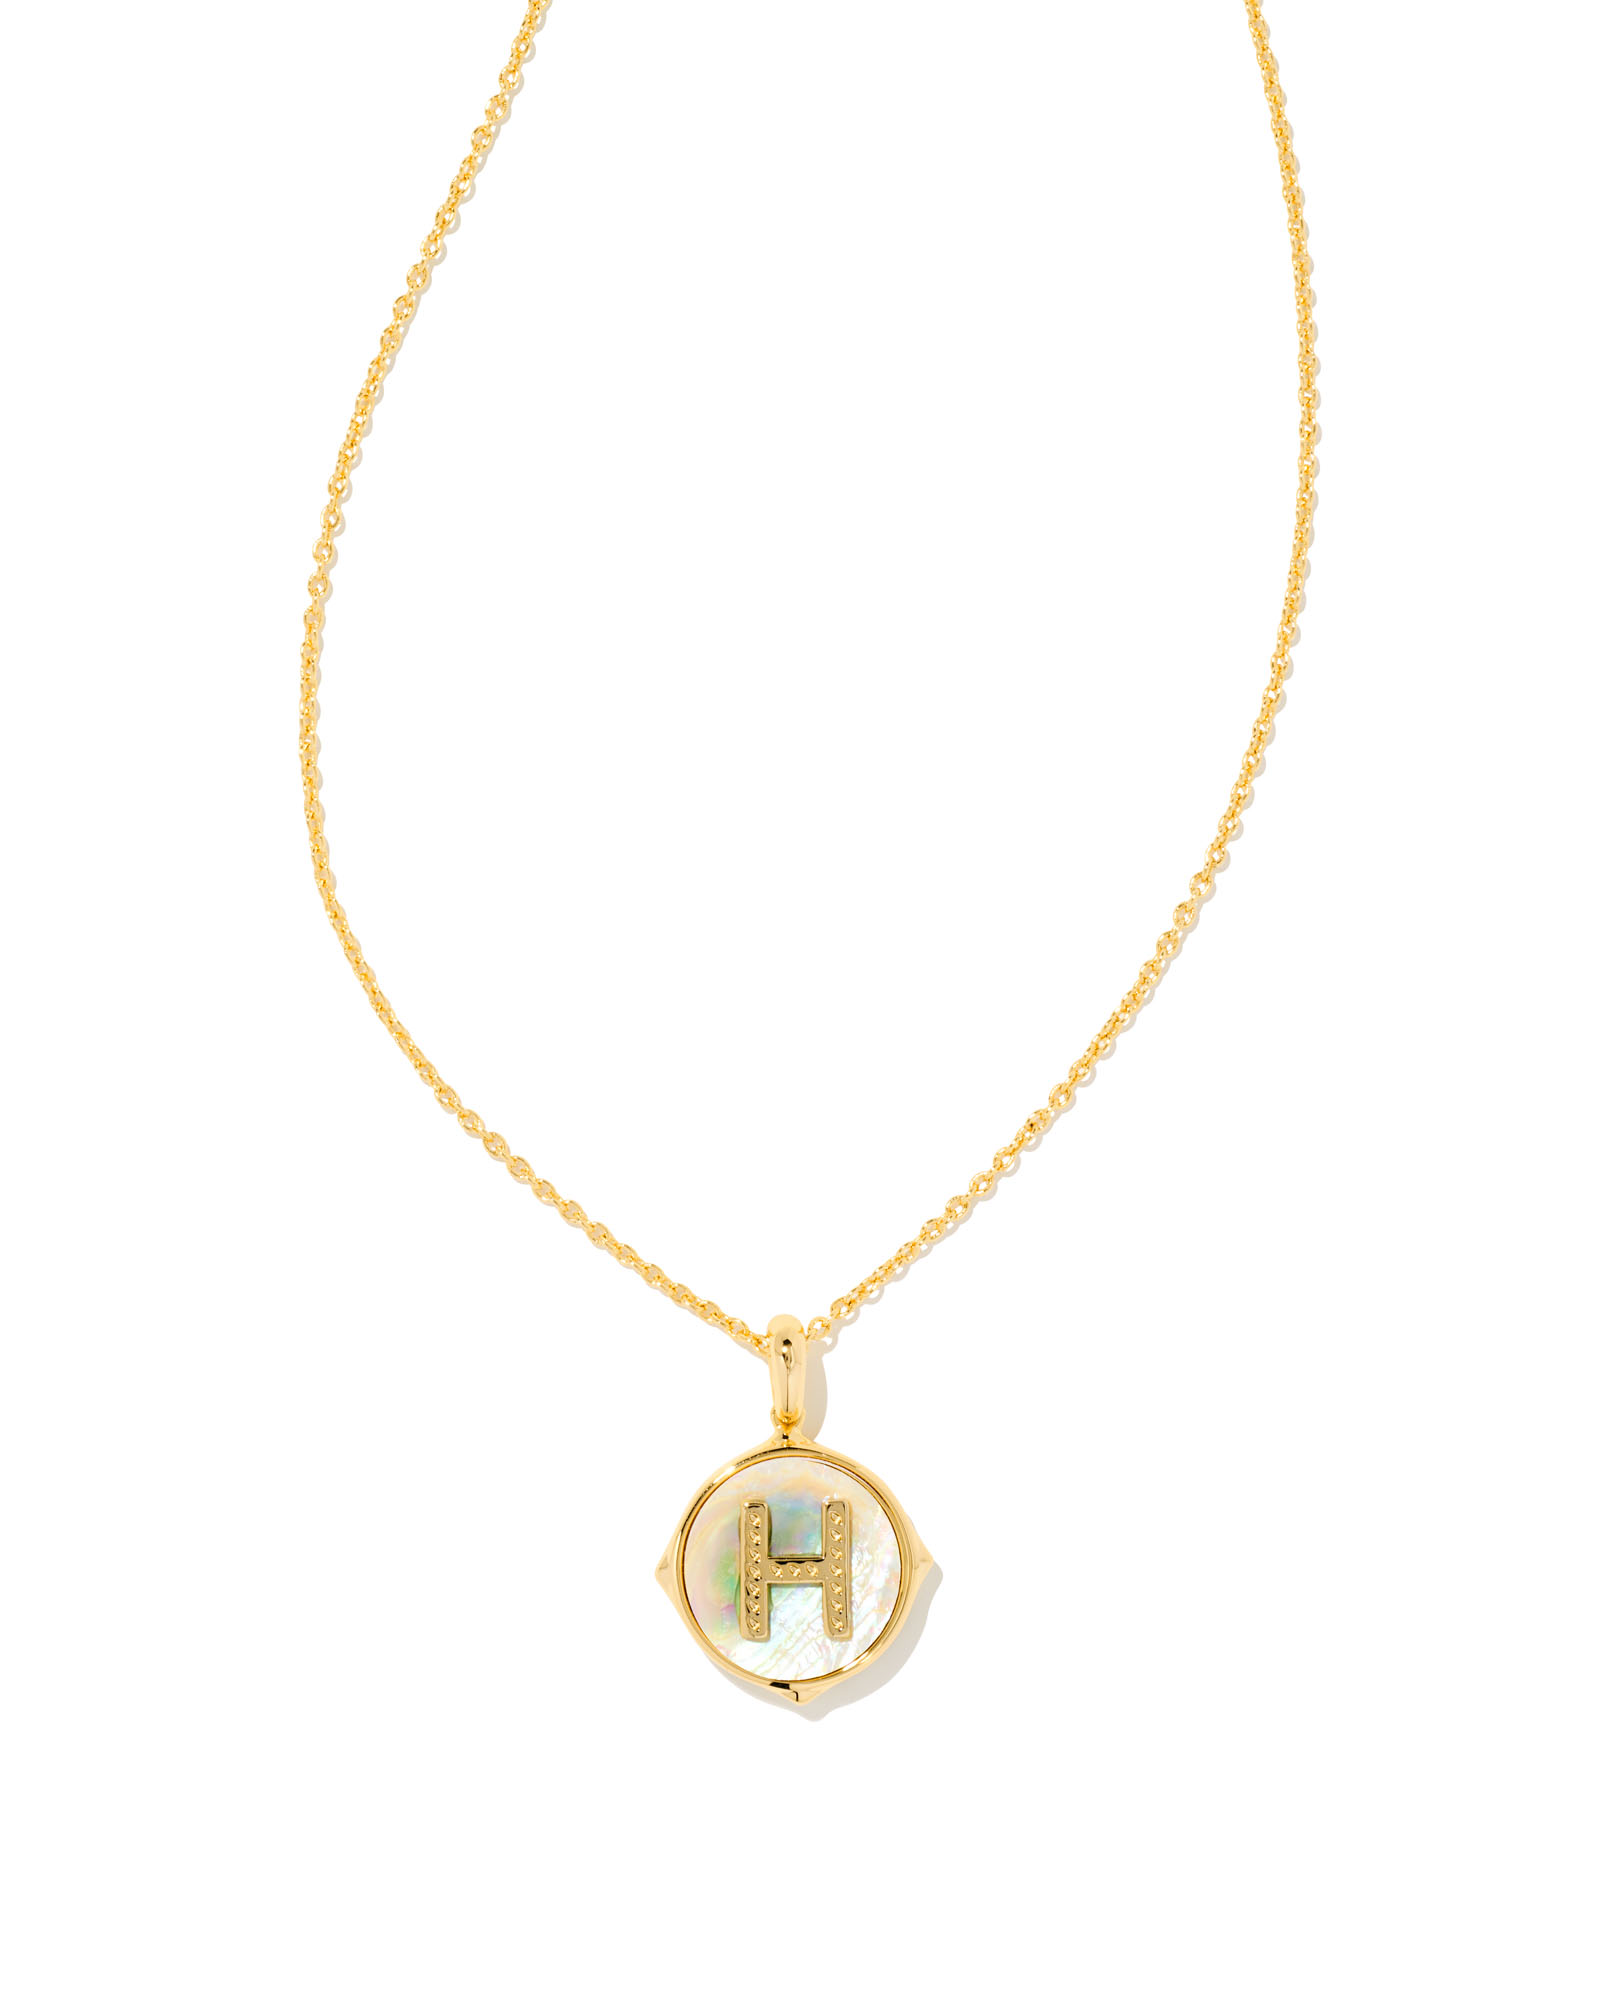 Letter A Pendant Necklace in Gold | Kendra Scott